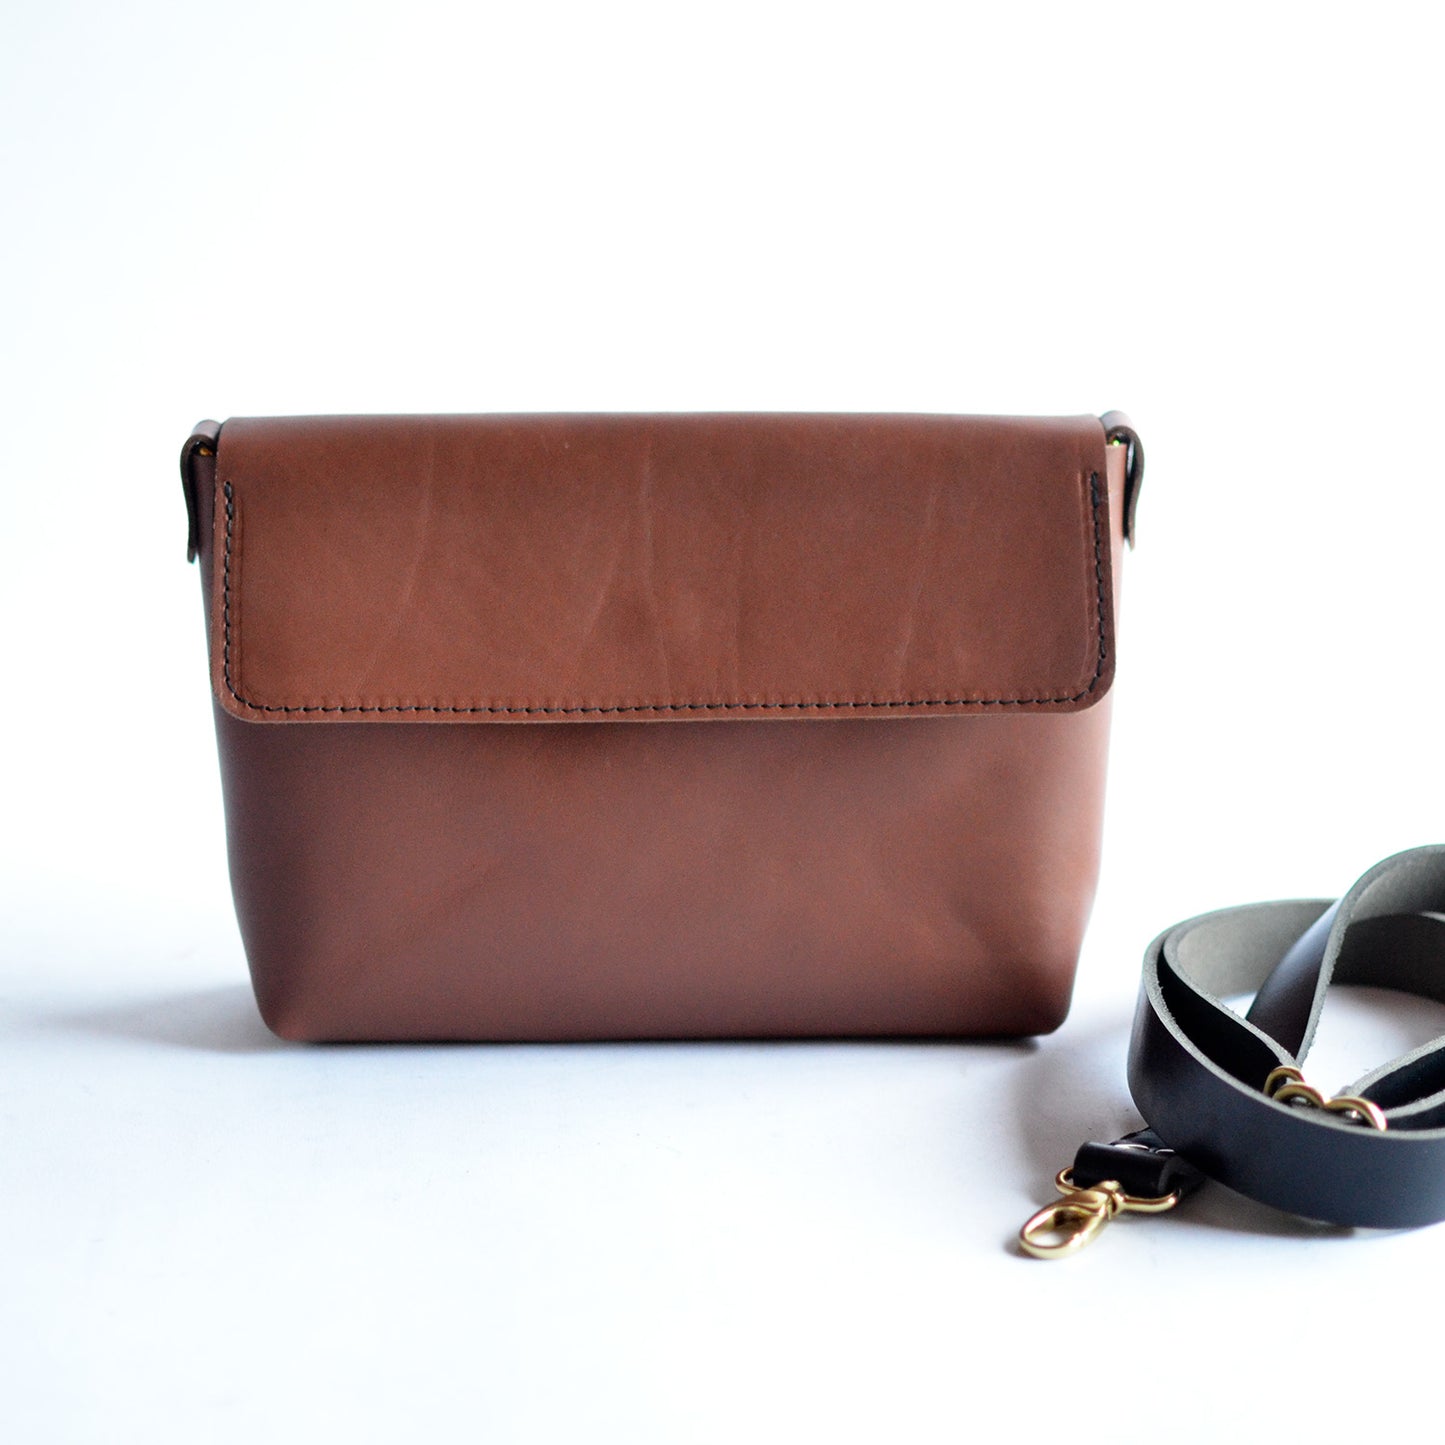 HARLOW Crossbody Clutch - Brown Leather